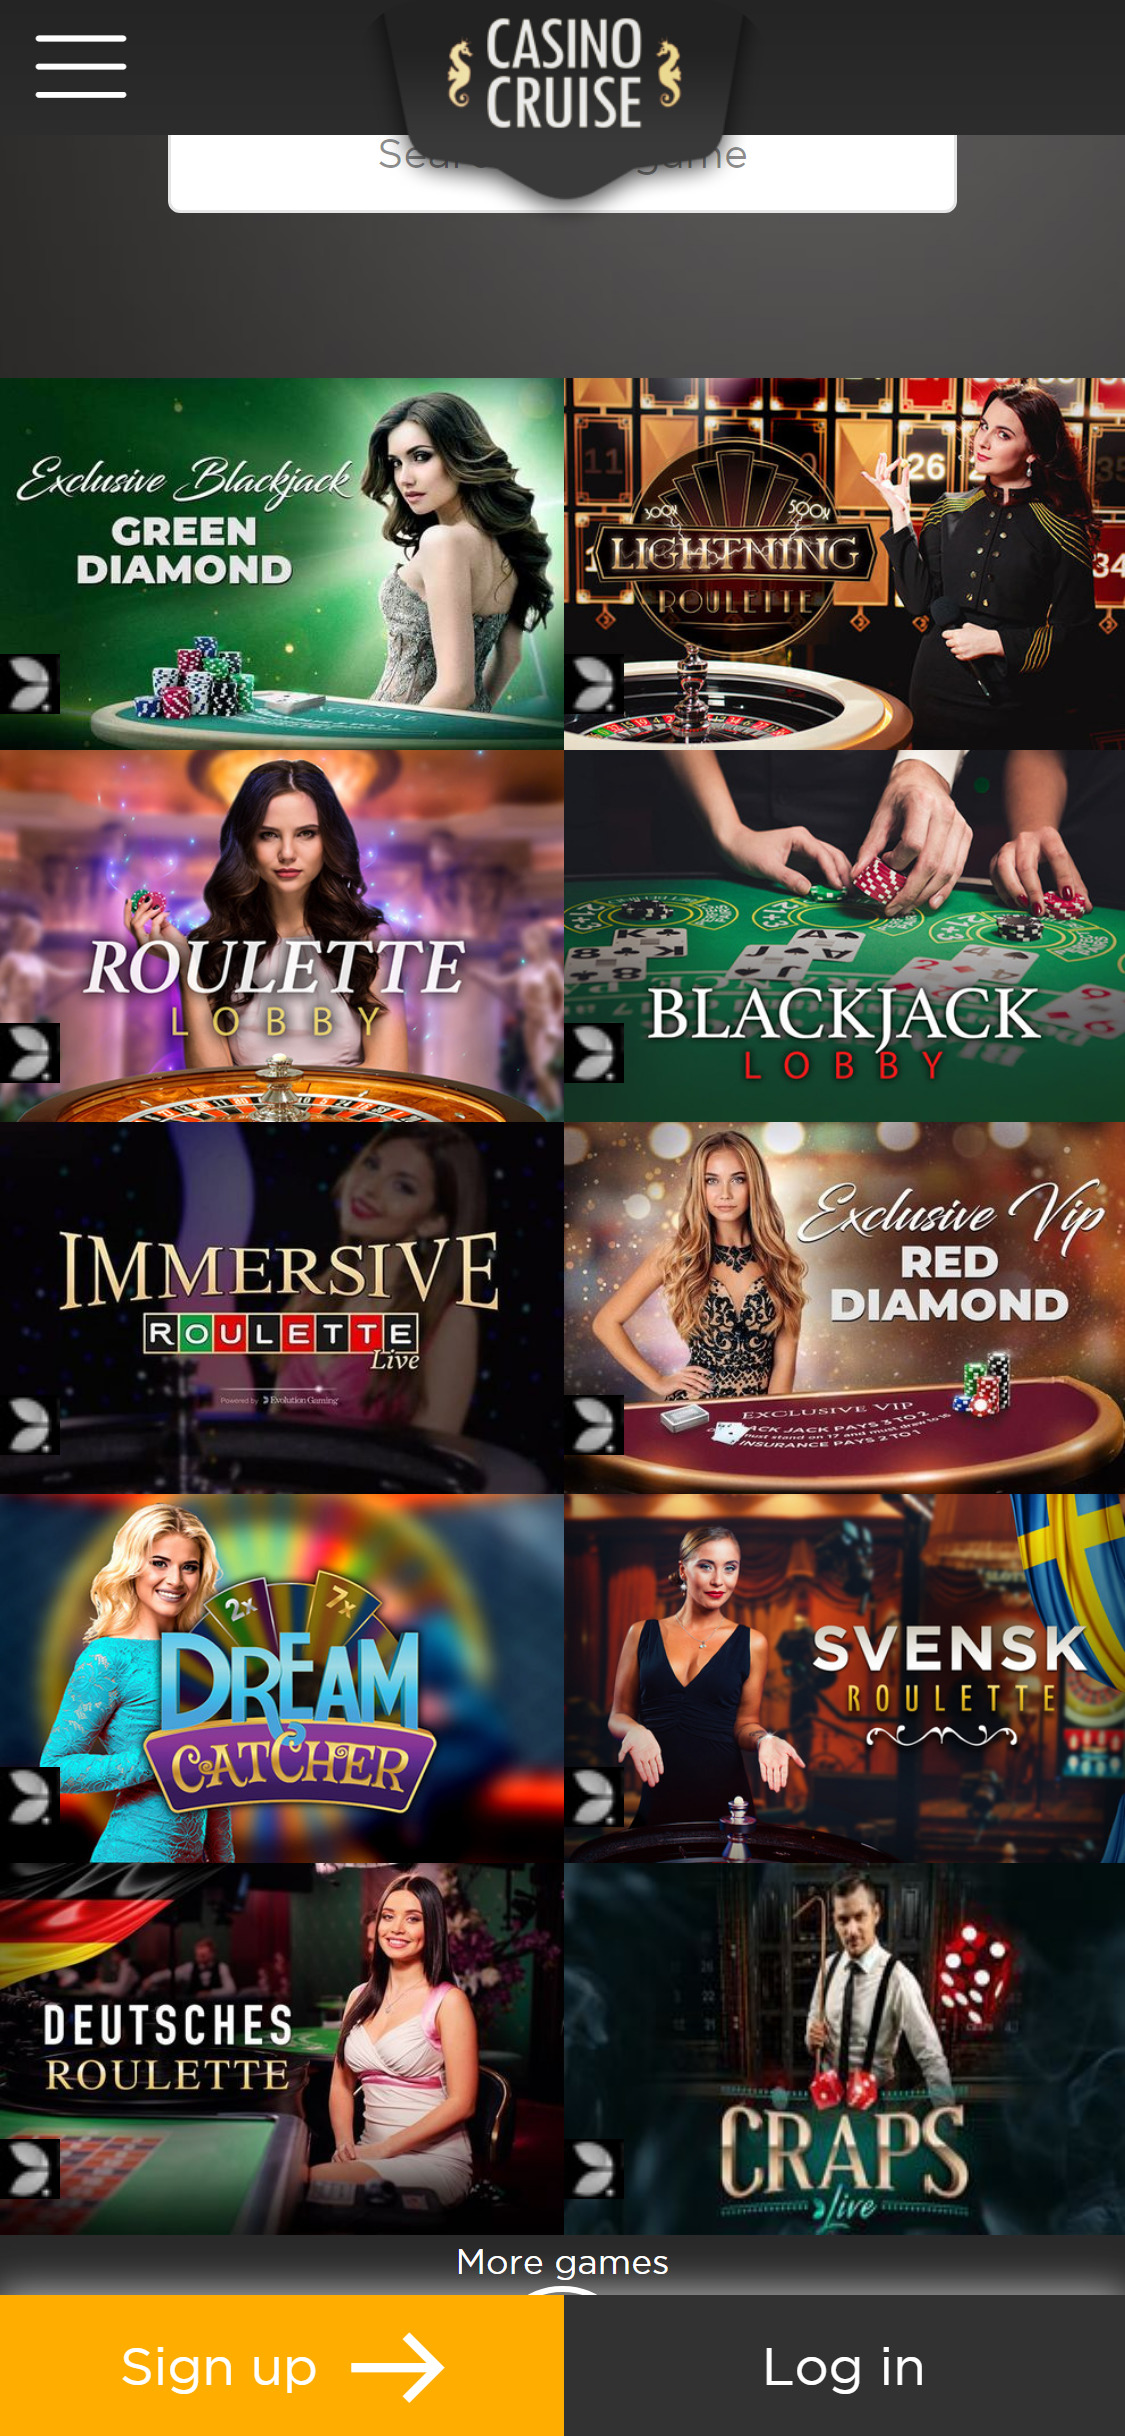 Casino Cruise Mobile Live Dealer Games Review